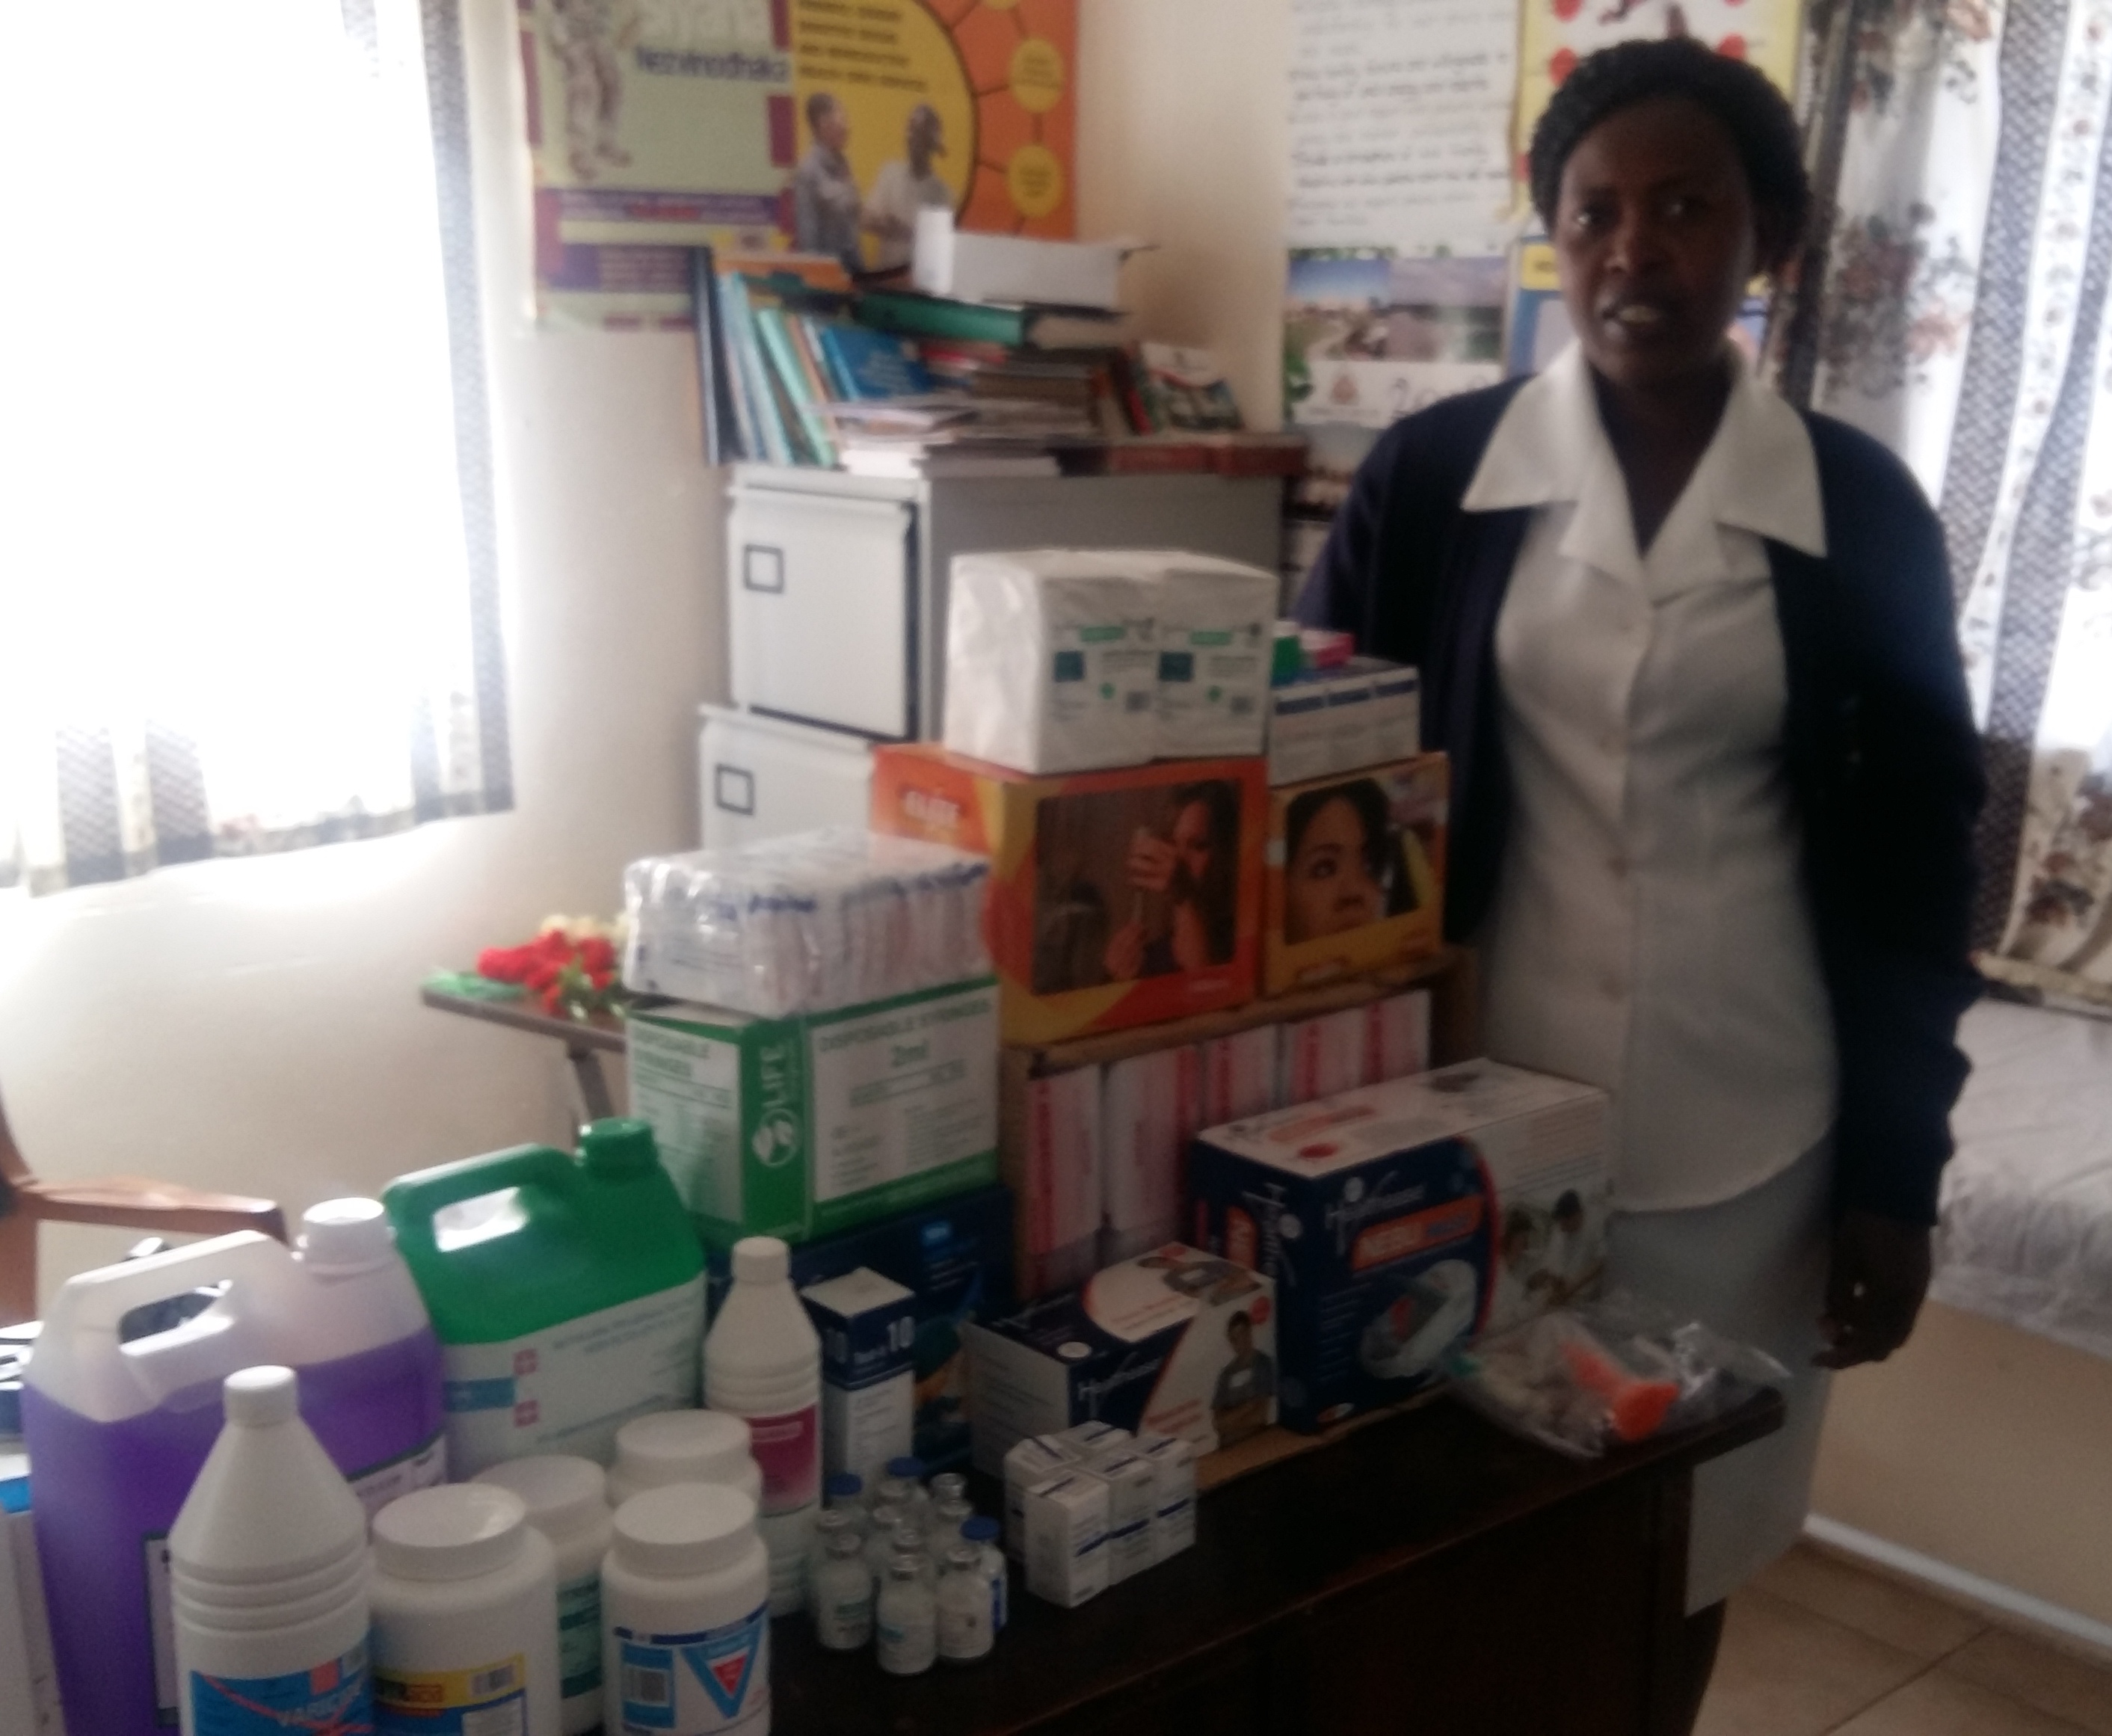 In the clinic - this is Litta, the Registered Nurse. She was so relieved to receive a donation of £500 to spend on items for the clinic